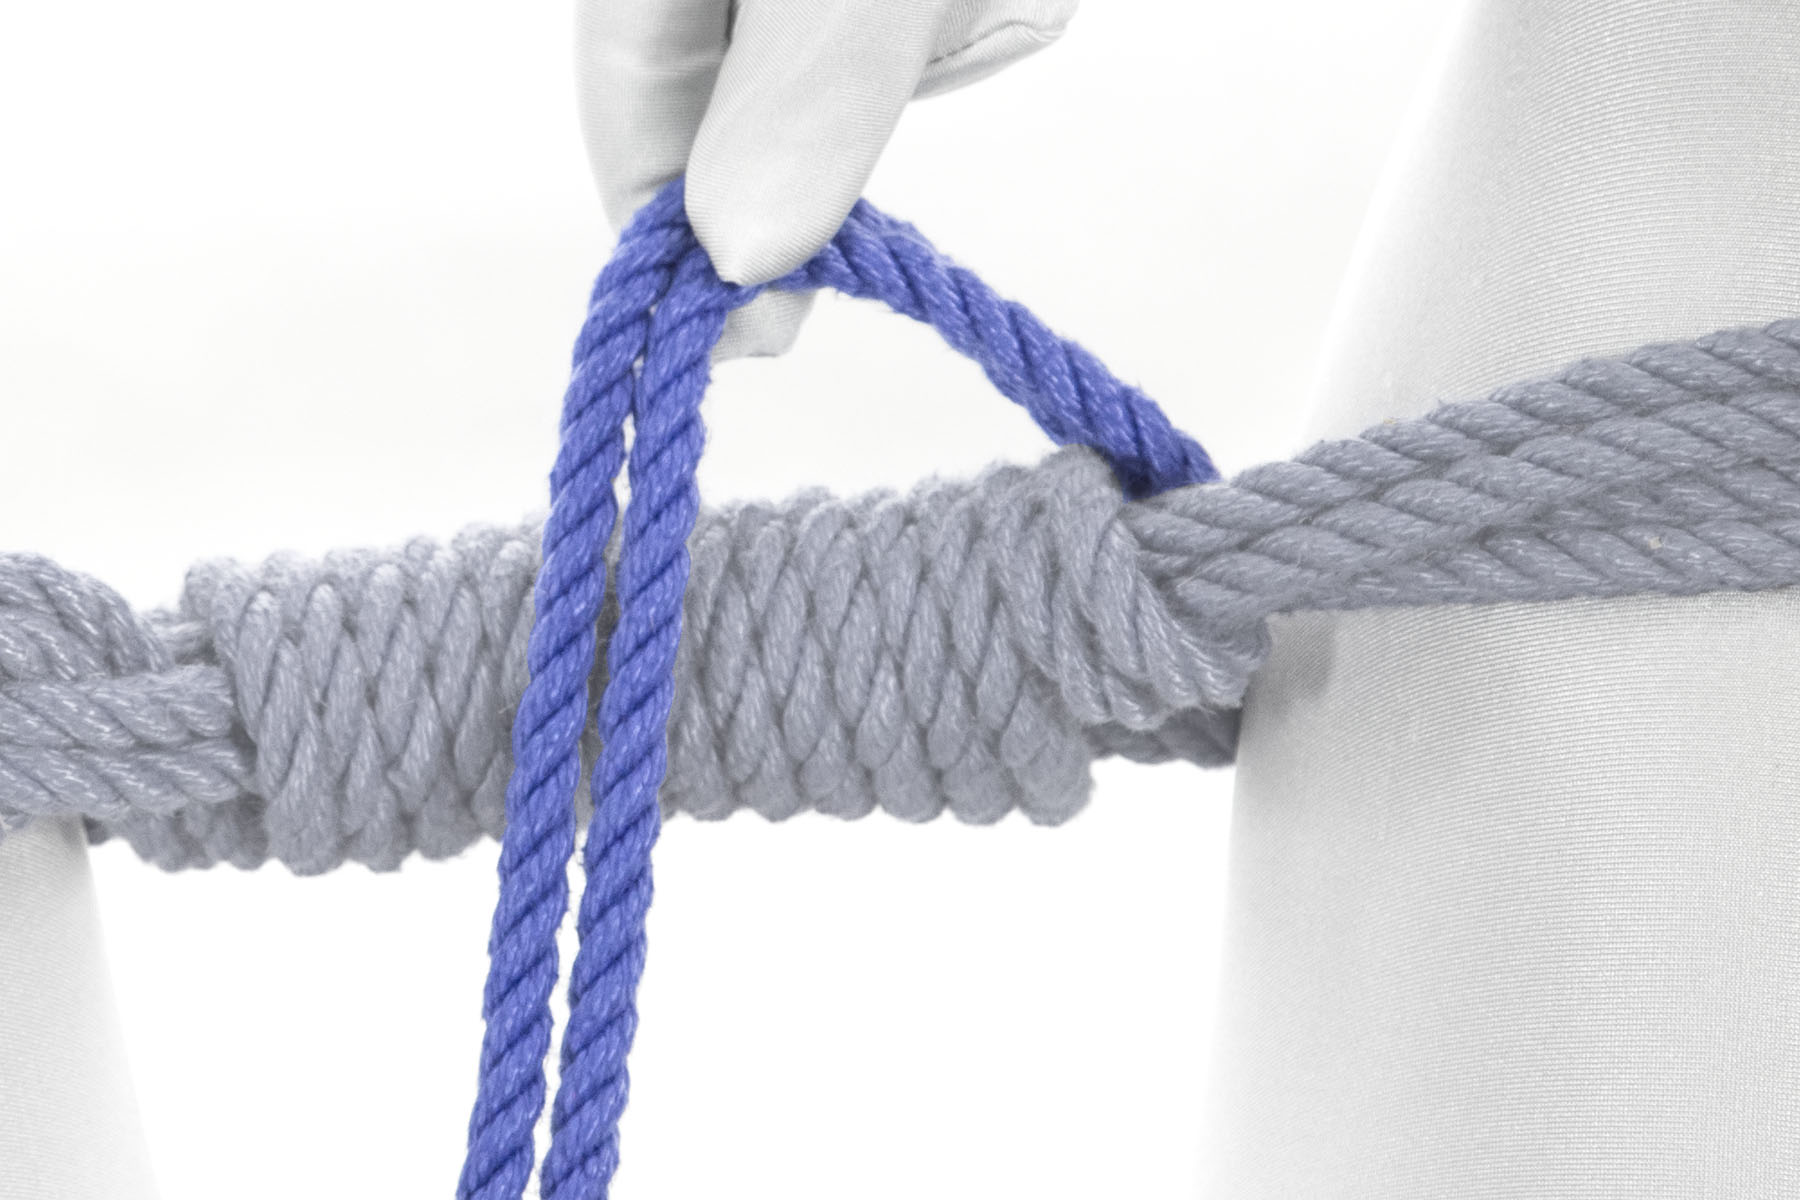 The rigger’s right hand has pulled the rope to the center of the bar tie.